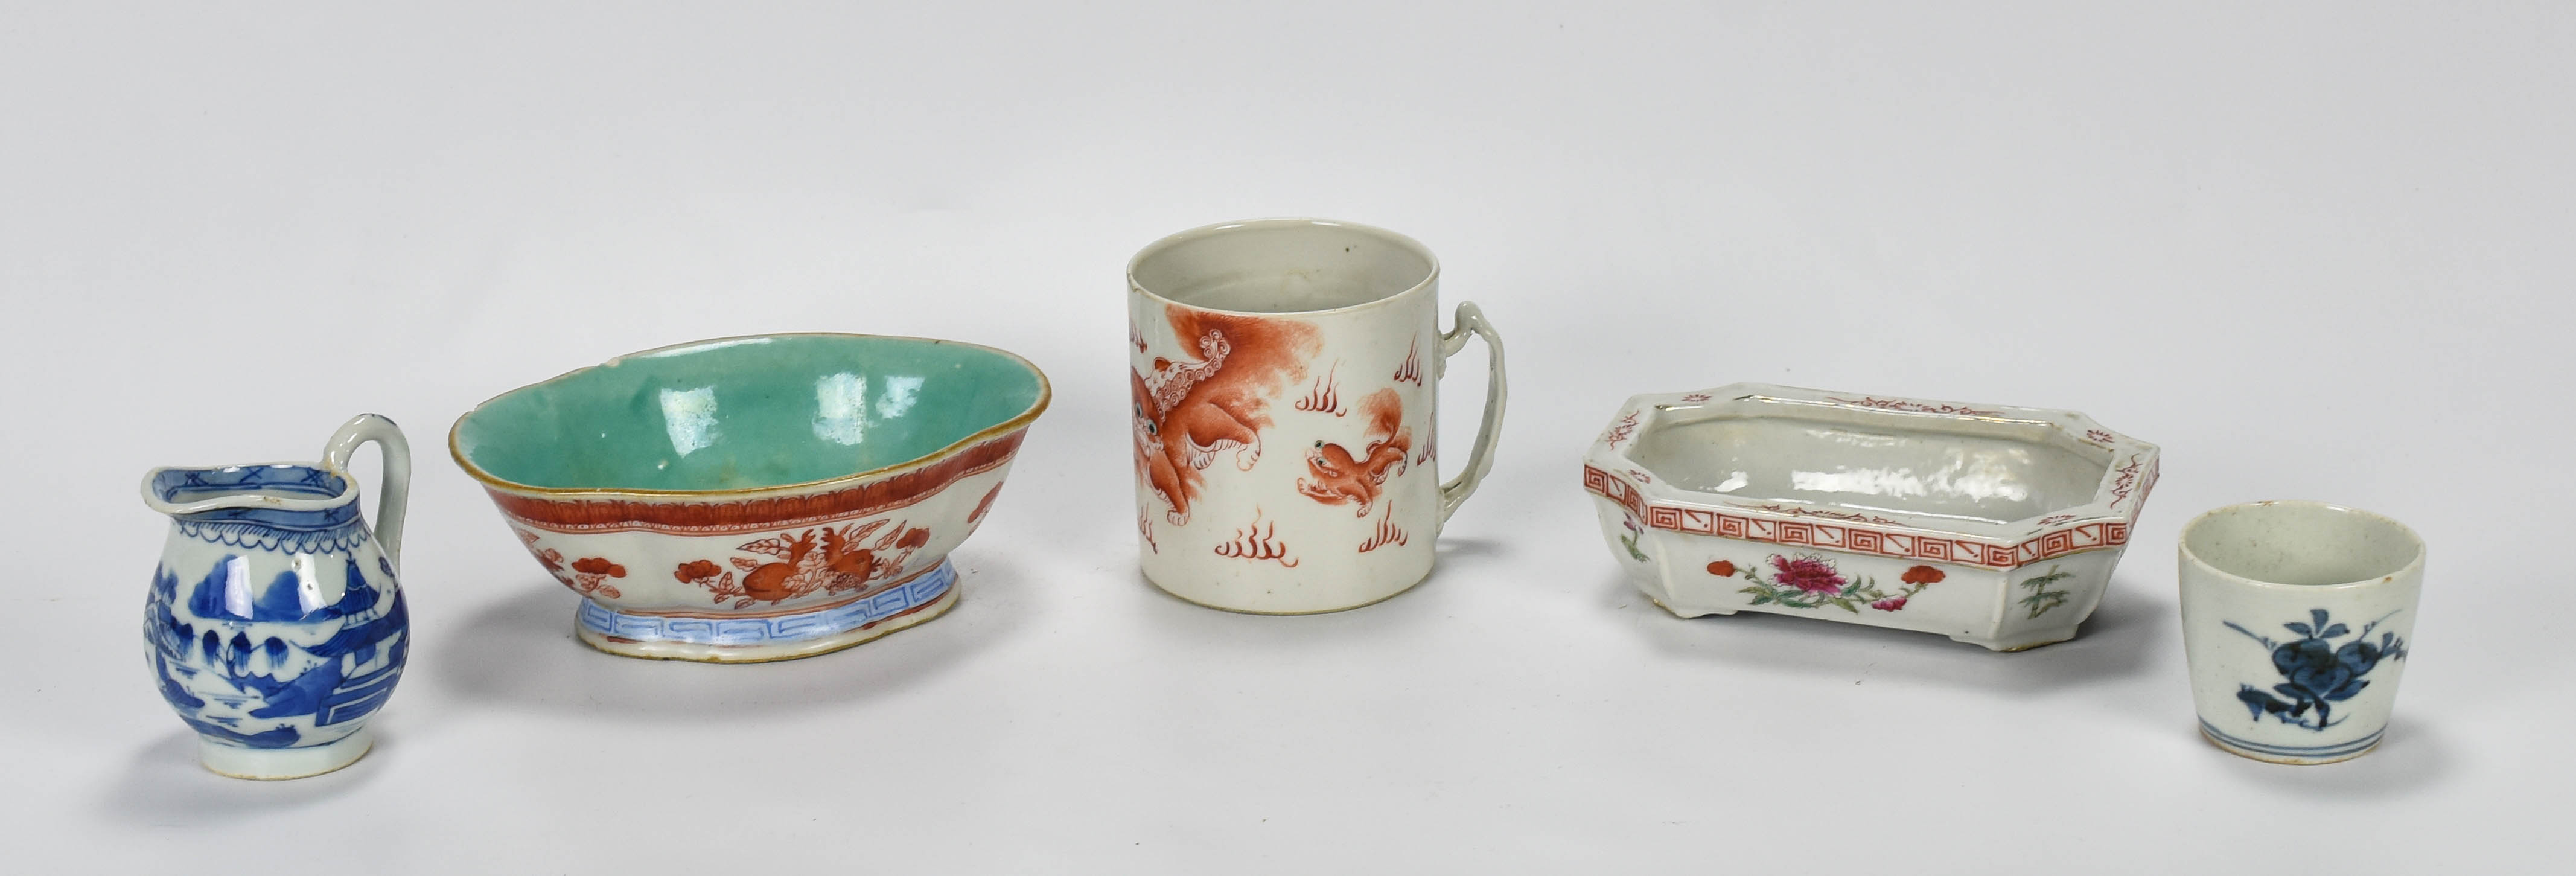 Group of Five Antique Chinese Porcelain Articles